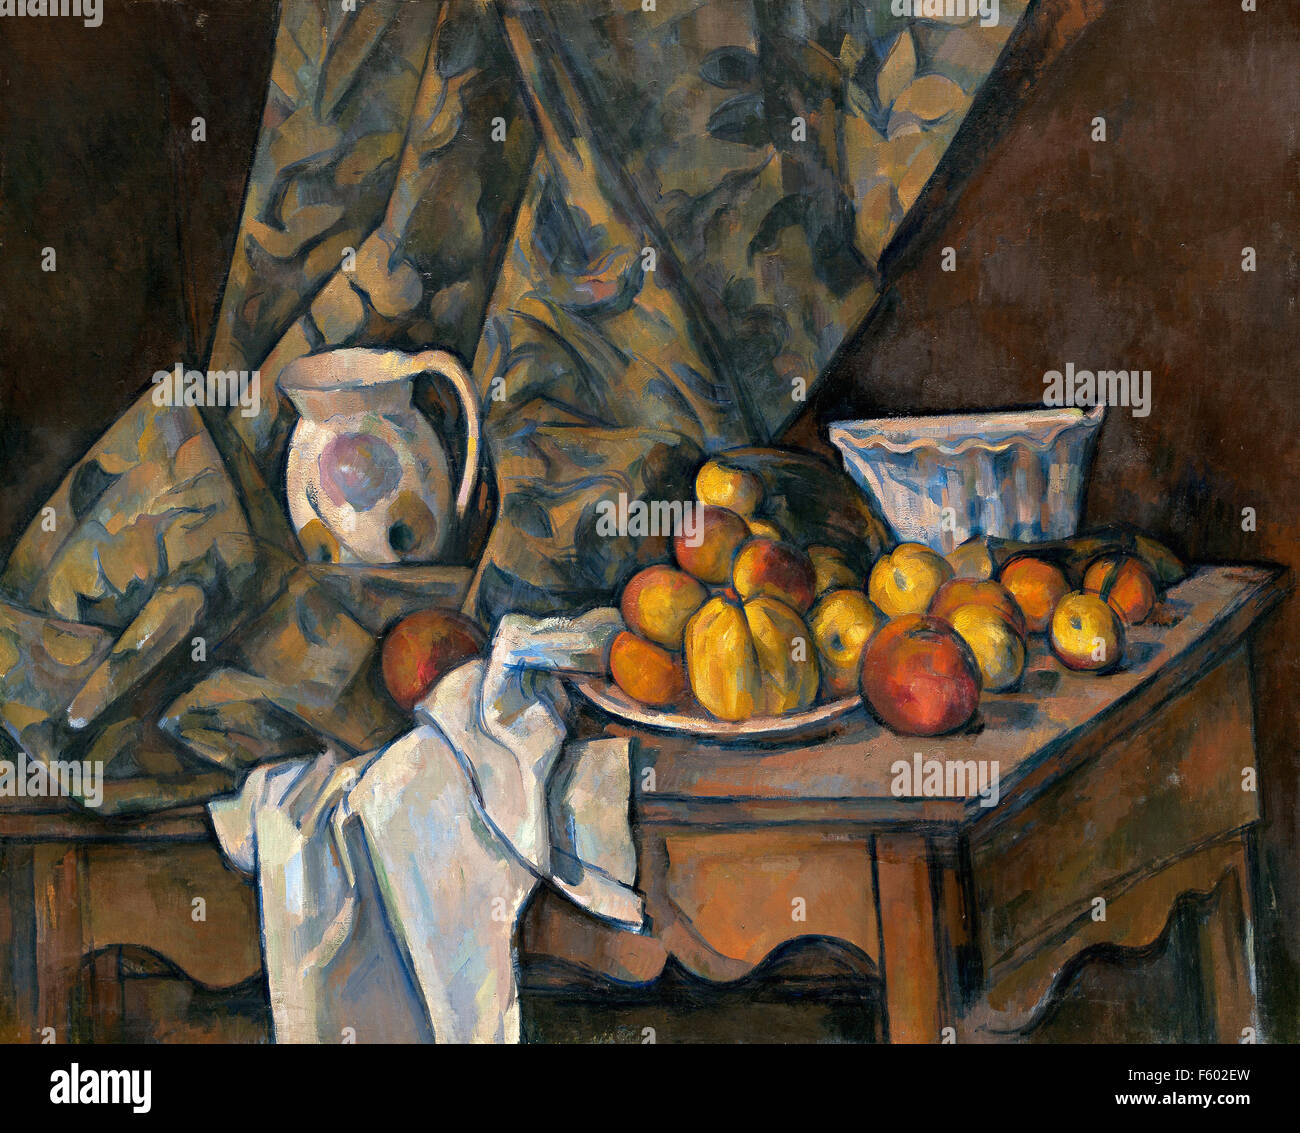 Paul Cézanne - Still Life with Apples and Peaches Stock Photo